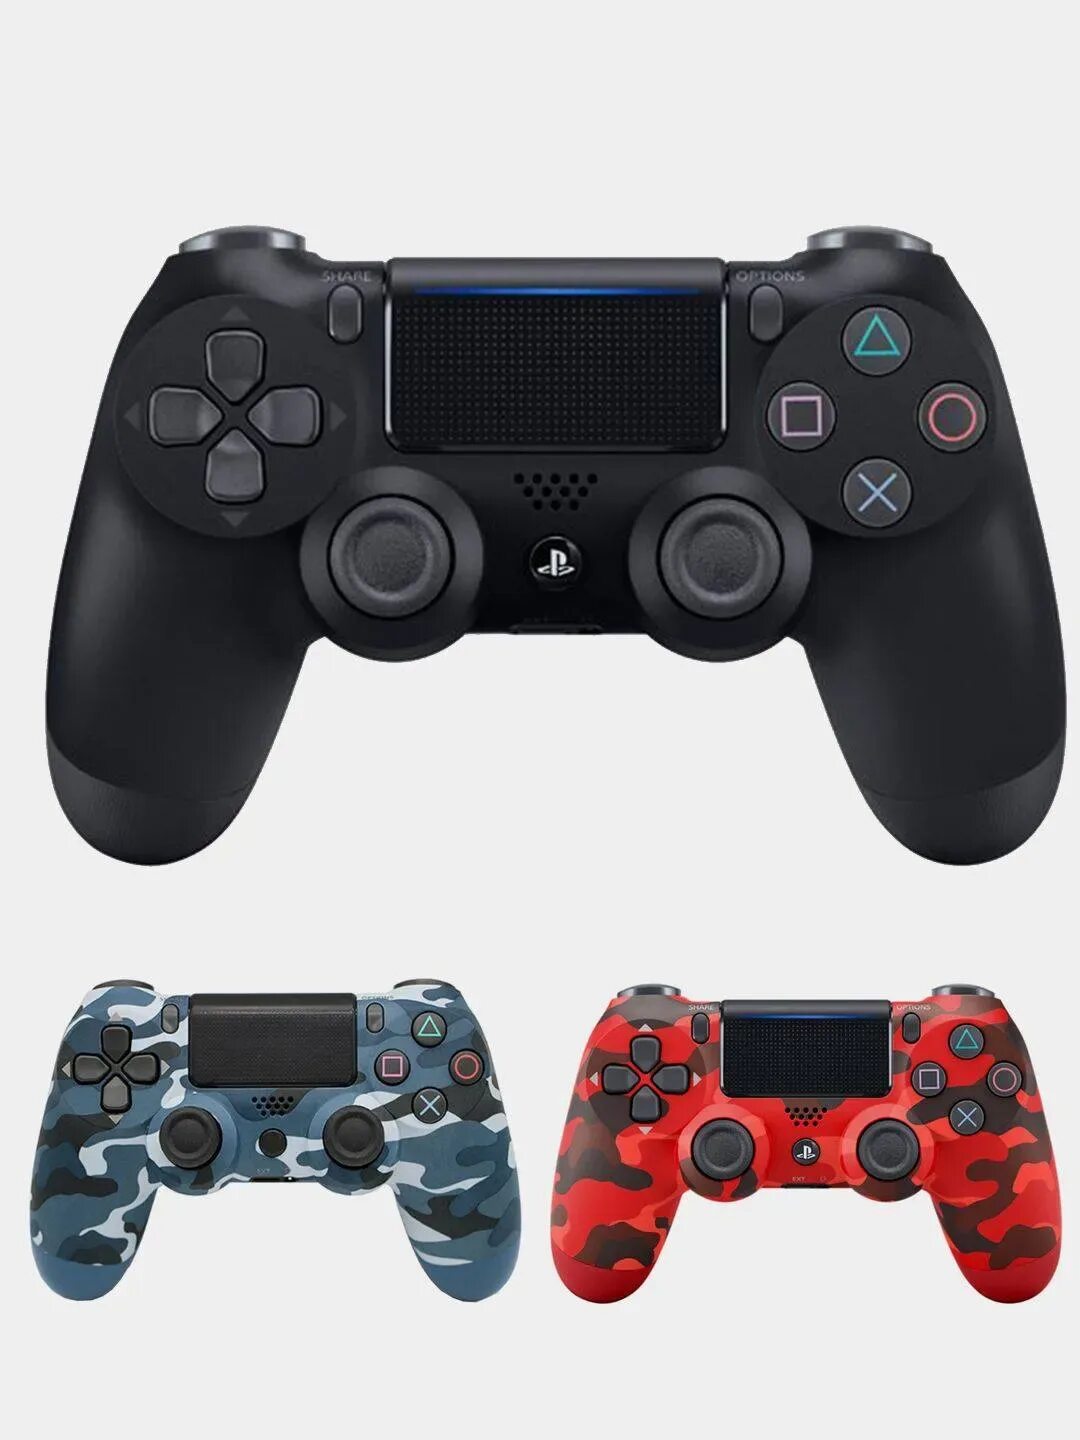 Ps4 джойстик android. Sony PLAYSTATION 4 Dualshock 4. Sony Dualshock 4 v2. Dualshock 4 PC. Ps4 Dualshock Key.